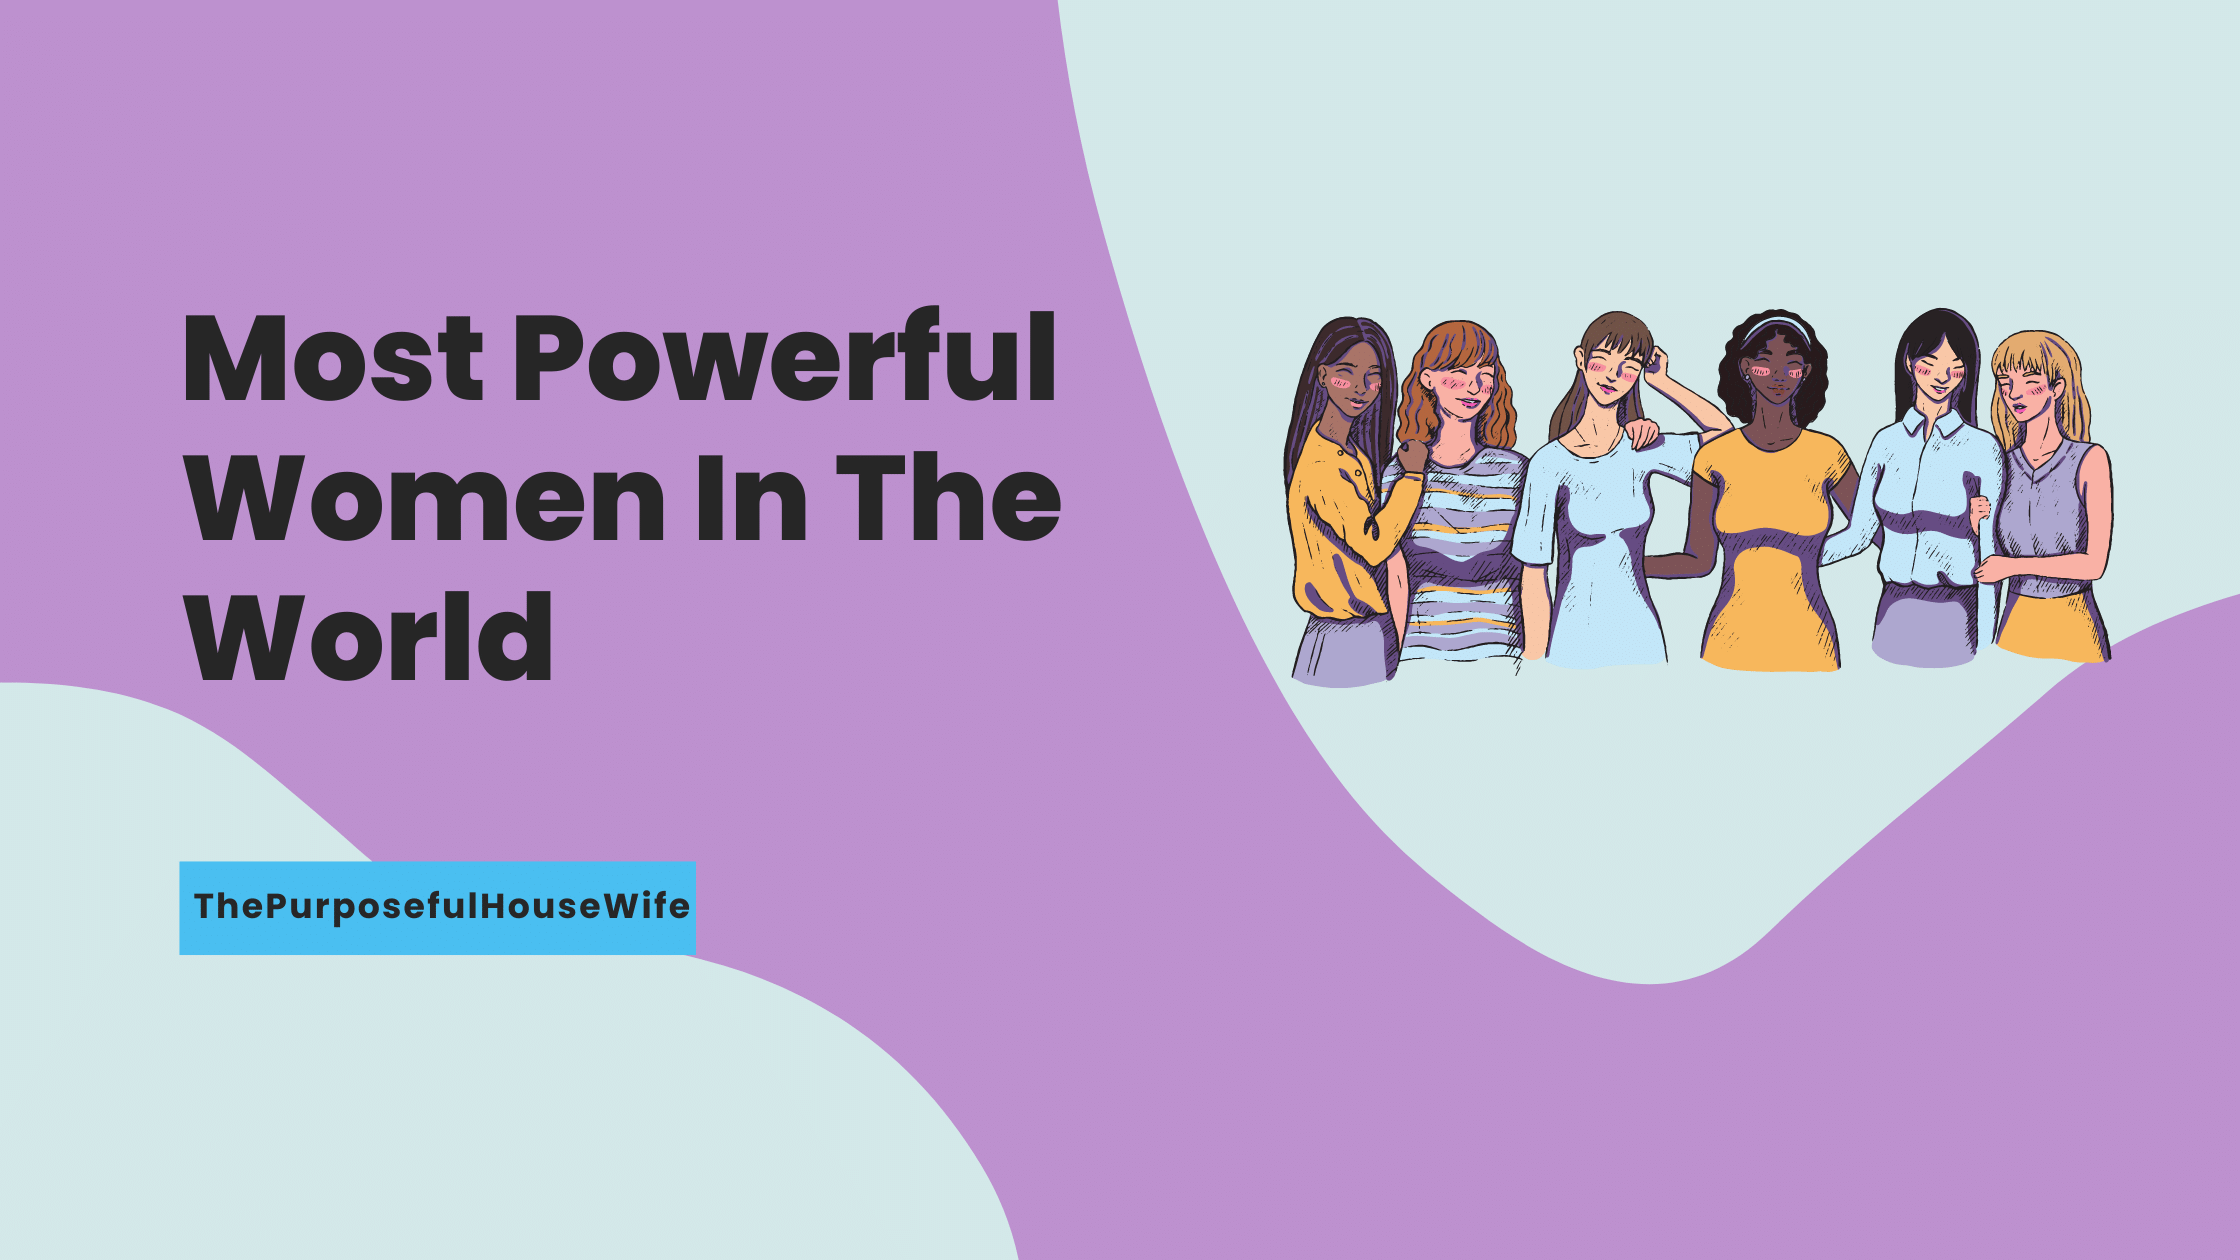 Most Powerful Women In The World - ThePurposefulHouseWife